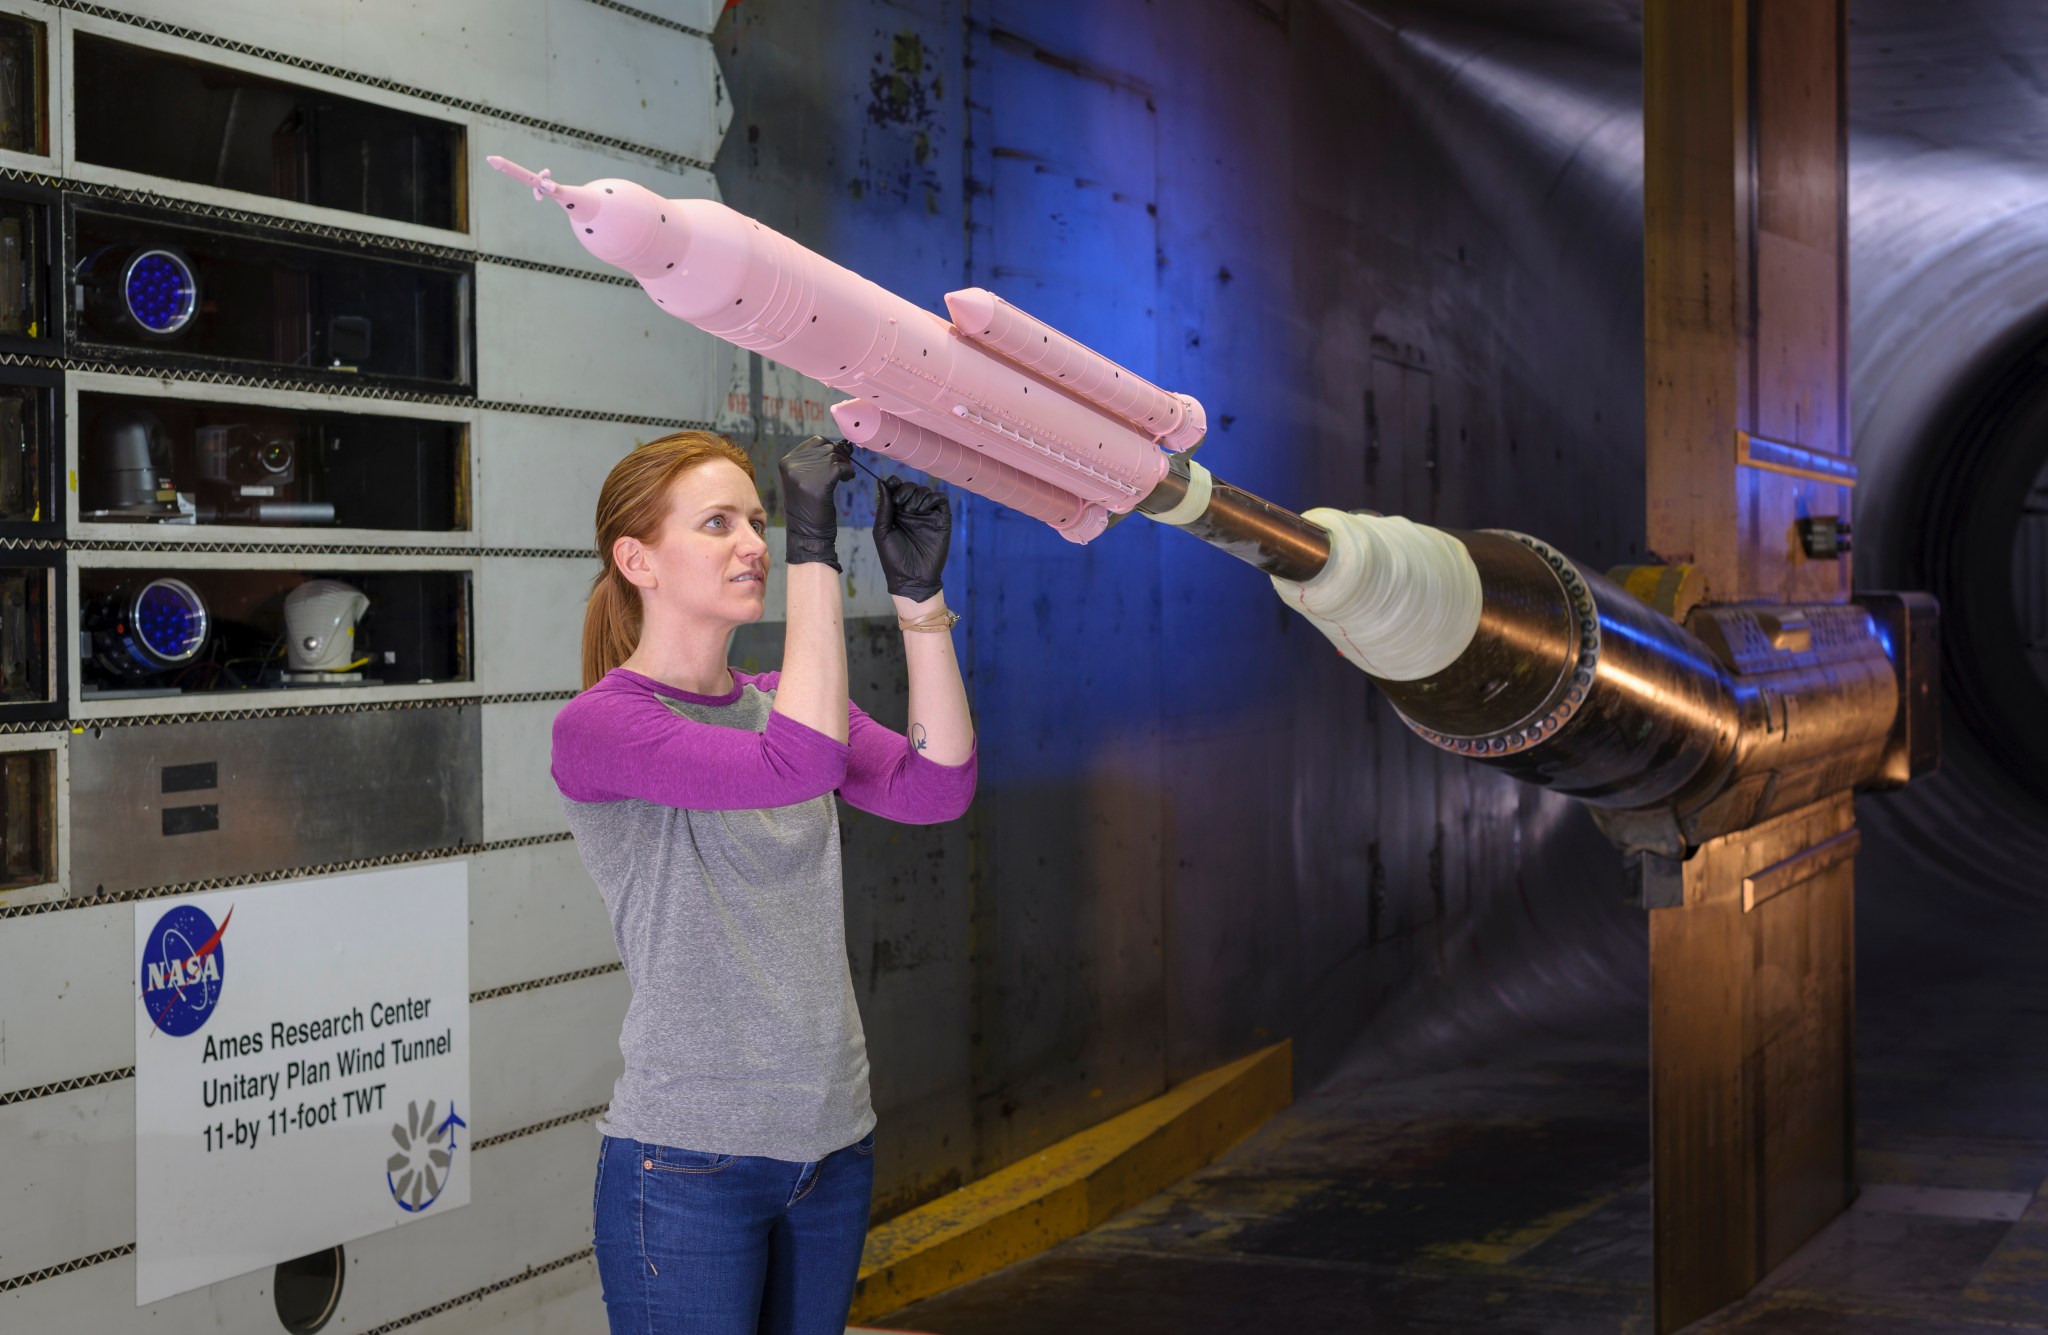 A model of the Space Launch System rocket is prepared for testing with pressure-sensitive paint in a wind tunnel at NASA Ames.